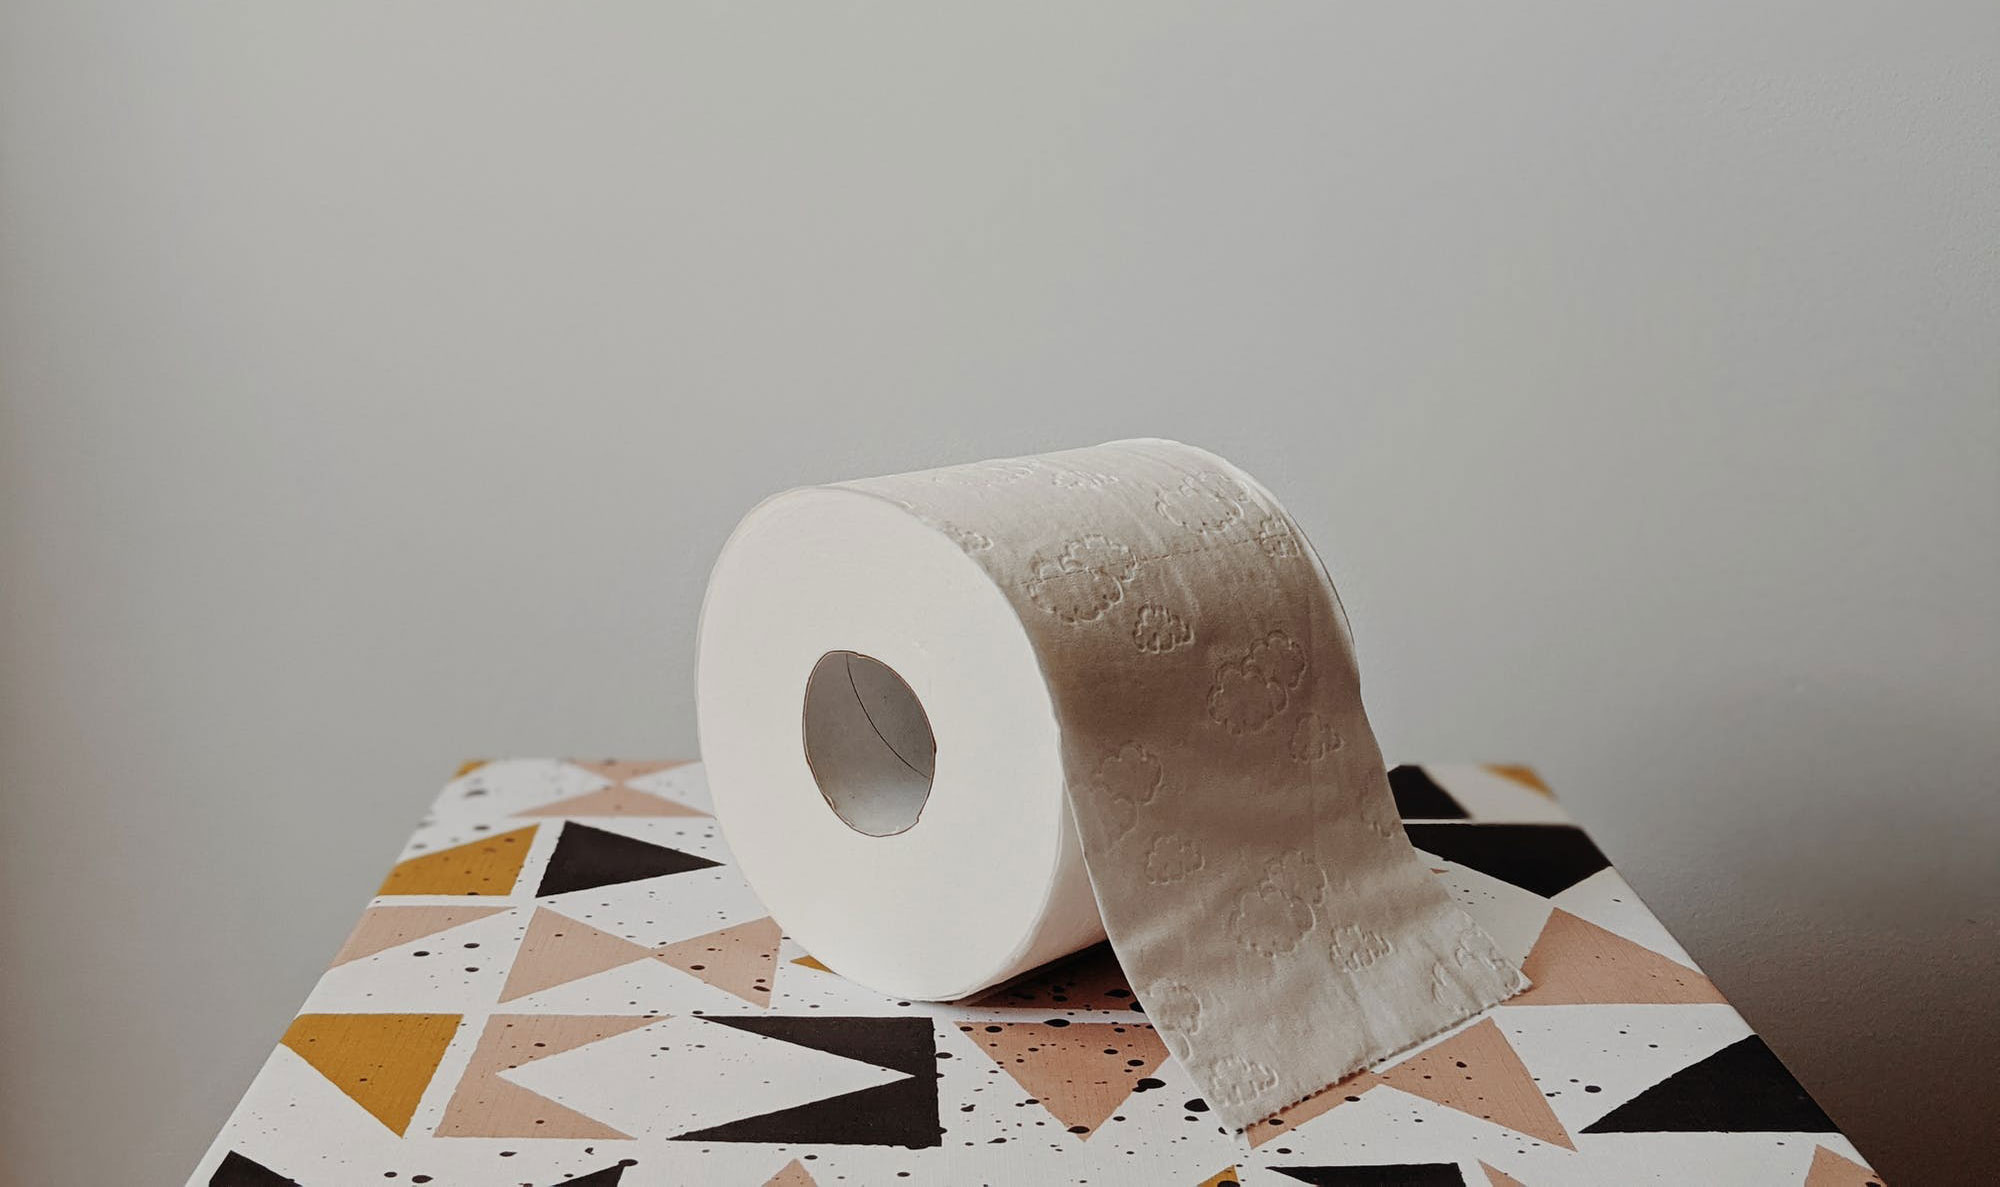 The image is showing the roll of toilet paper ready to use for defecation when constipated.